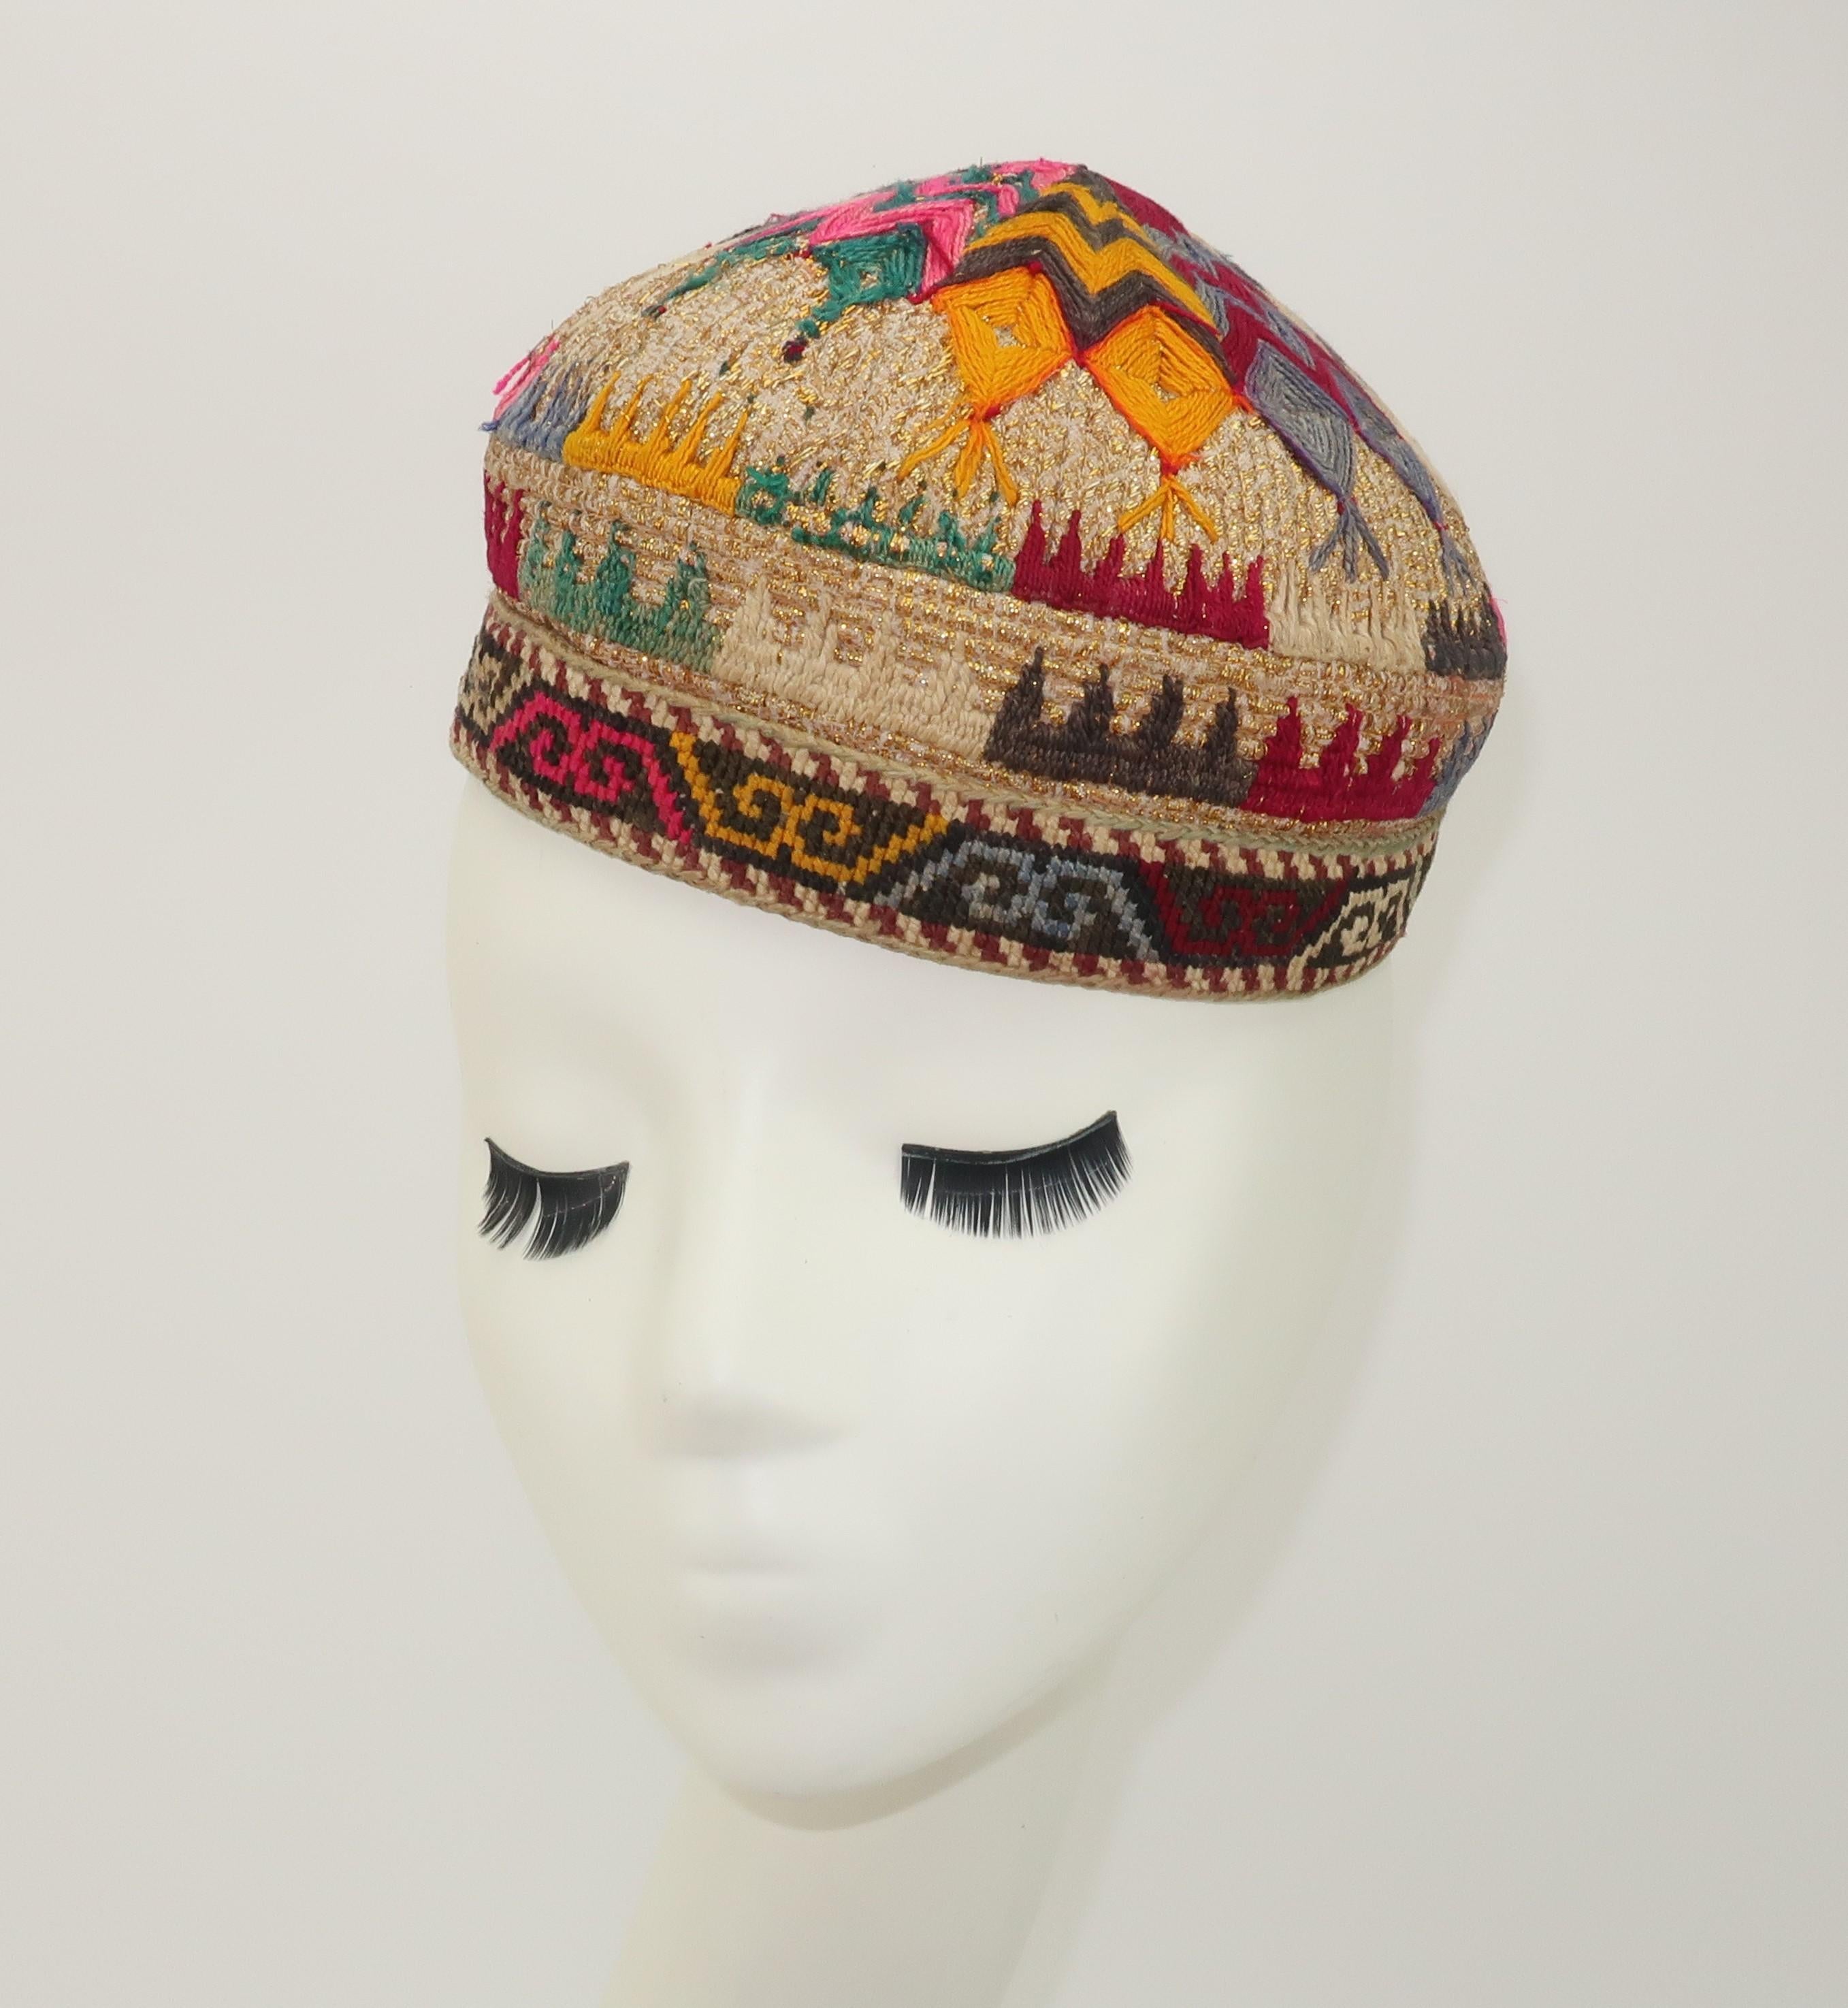 Early 20th Century Central Asian hat, most likely from Uzbekistan, with intricate detailed embroidery accented by gold metallic threading.  The interior is lined with a quilted printed cotton and the brim is decorated with needlework in a geometric